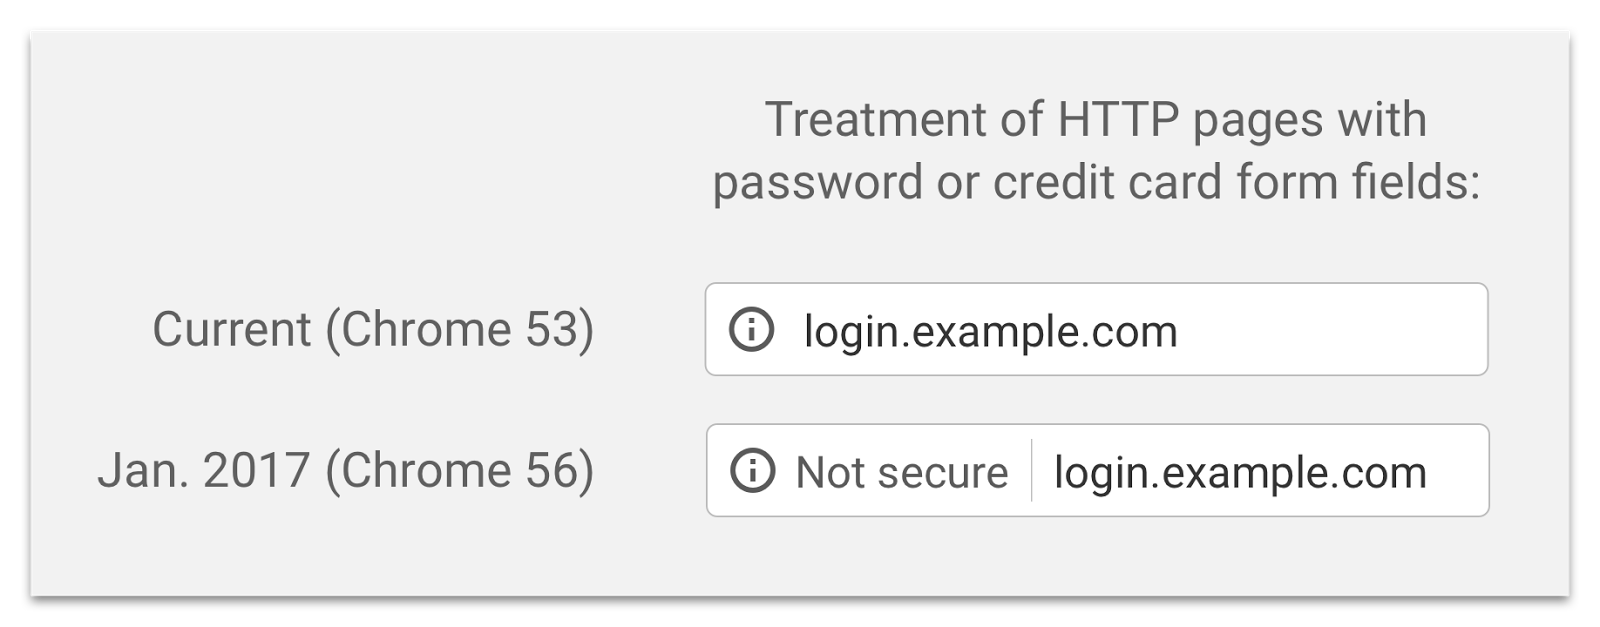 Sites that require users to login or enter credit card information are now displayed as "Not secure" in Chrome when they haven't switched to HTTPS yet.